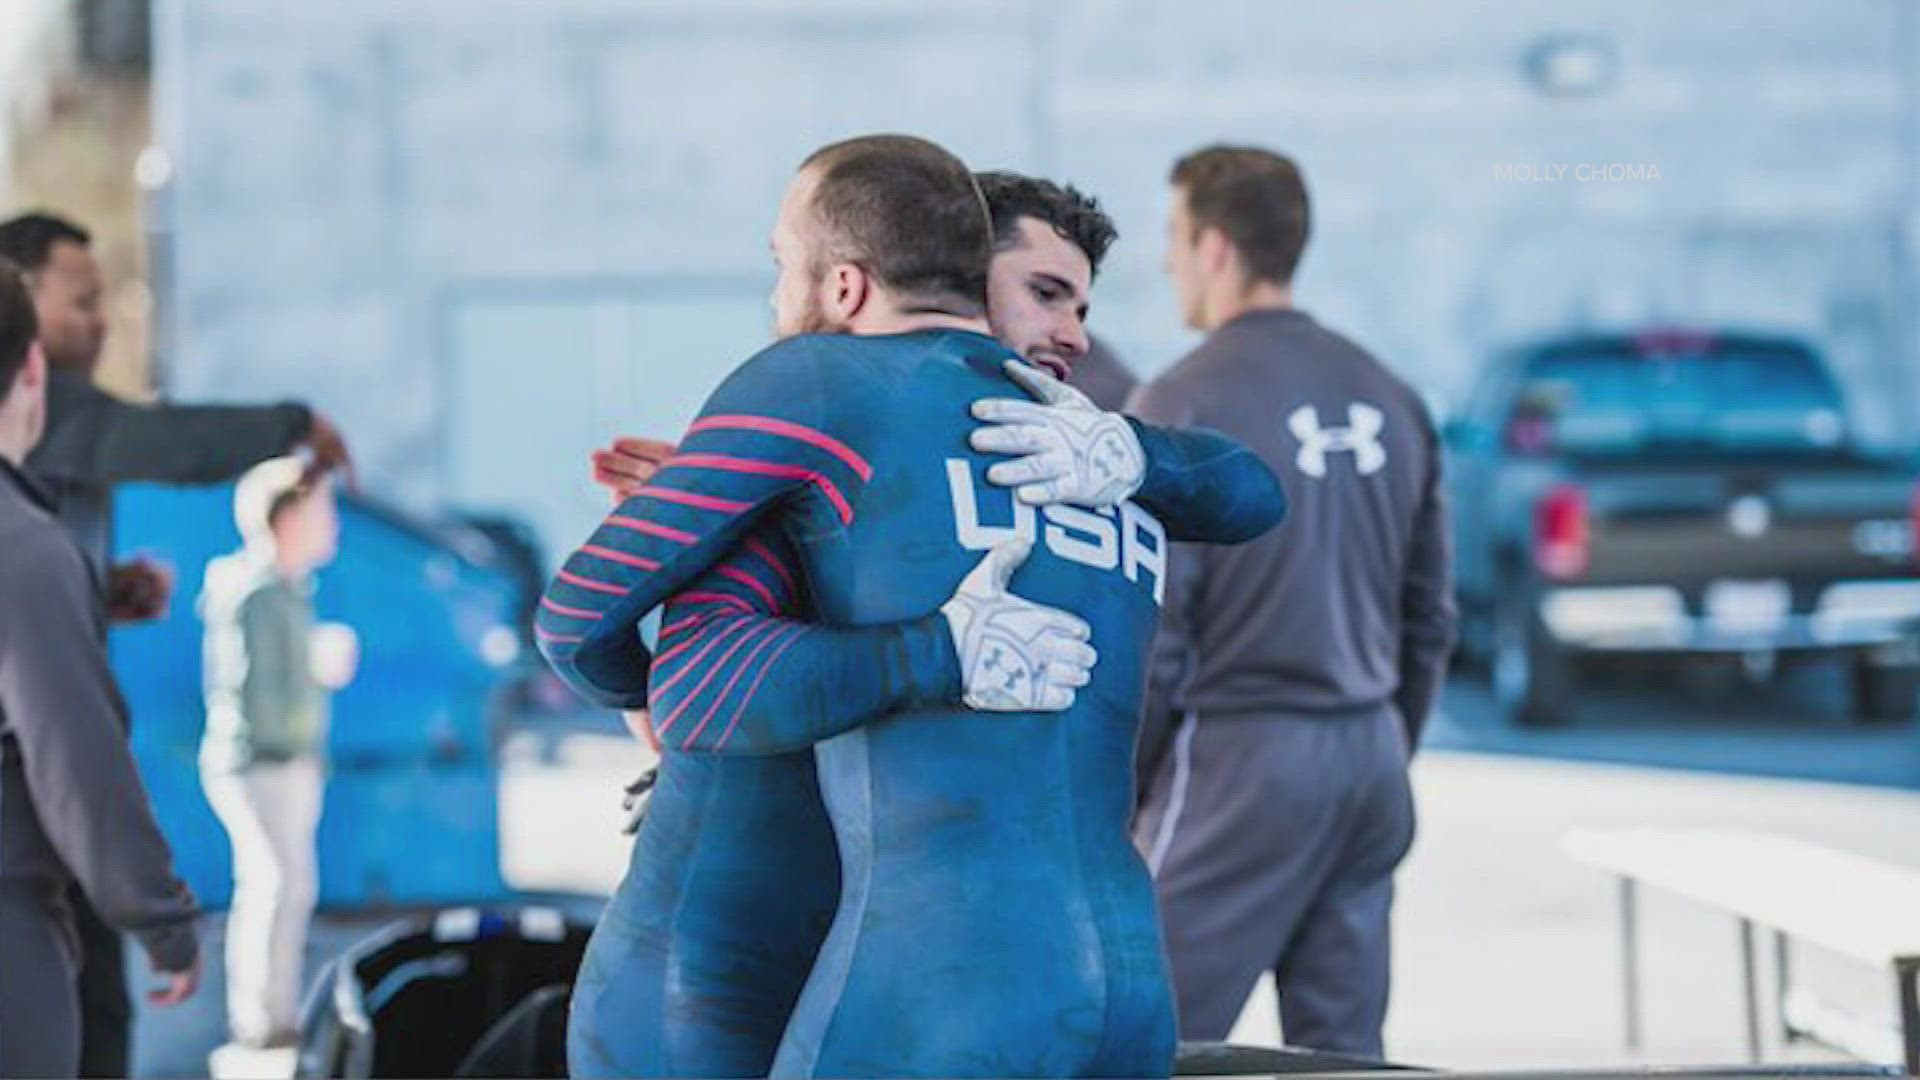 Frank Del Duca, a Bethel native and University of Maine graduate, is competing in the 2-man and 4-man bobsled events at the 2022 Winter Olympics in Beijing, China.